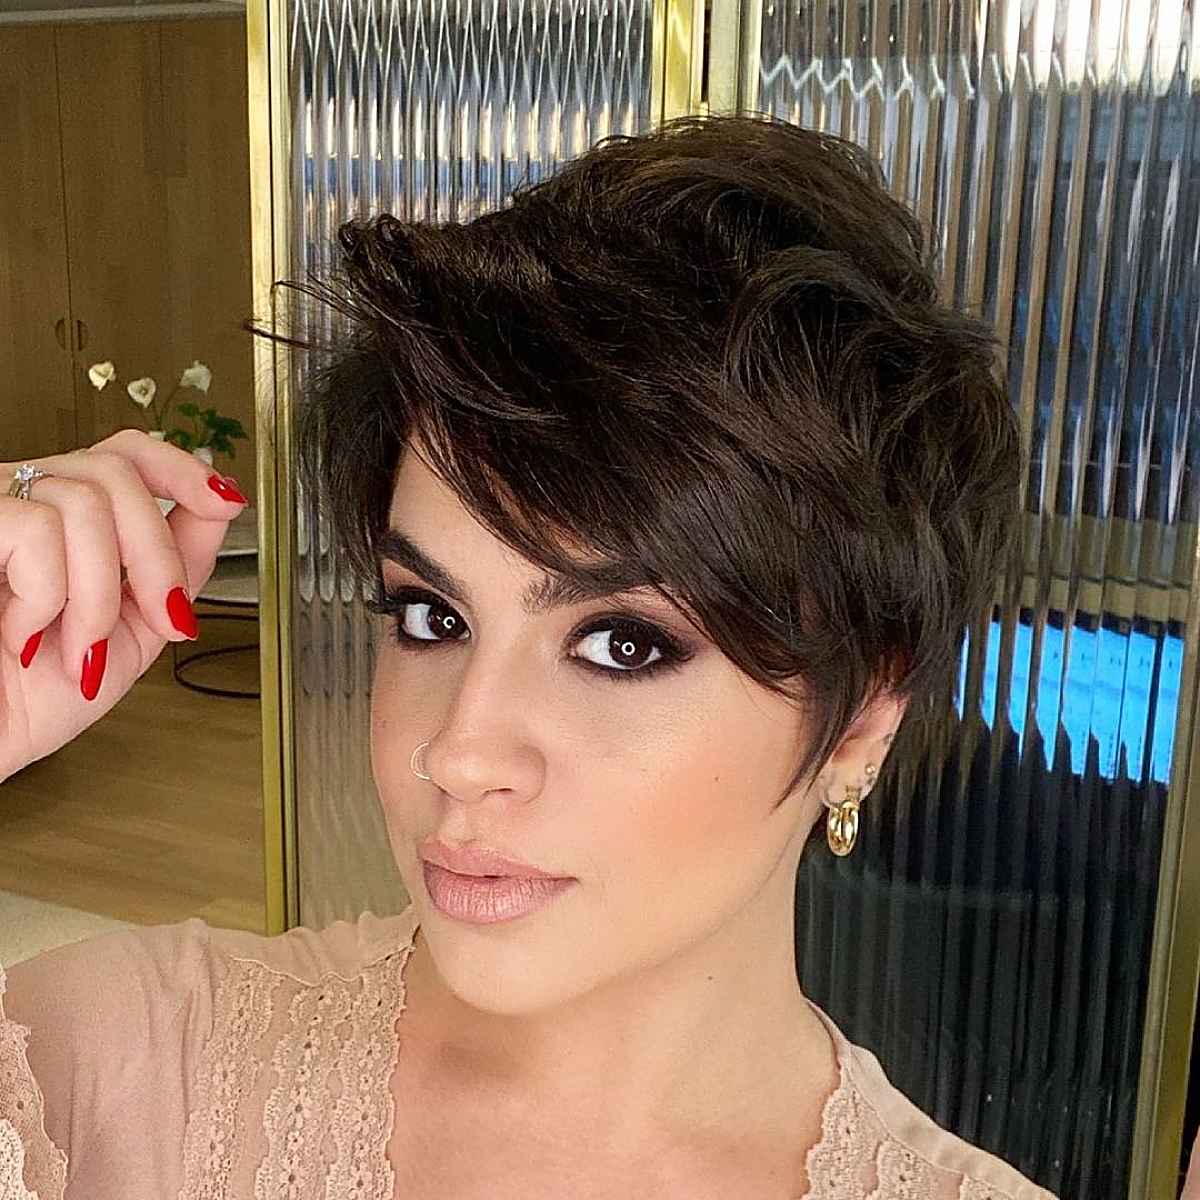 31 Messy Pixie Cuts for a Tousled, Chic Look